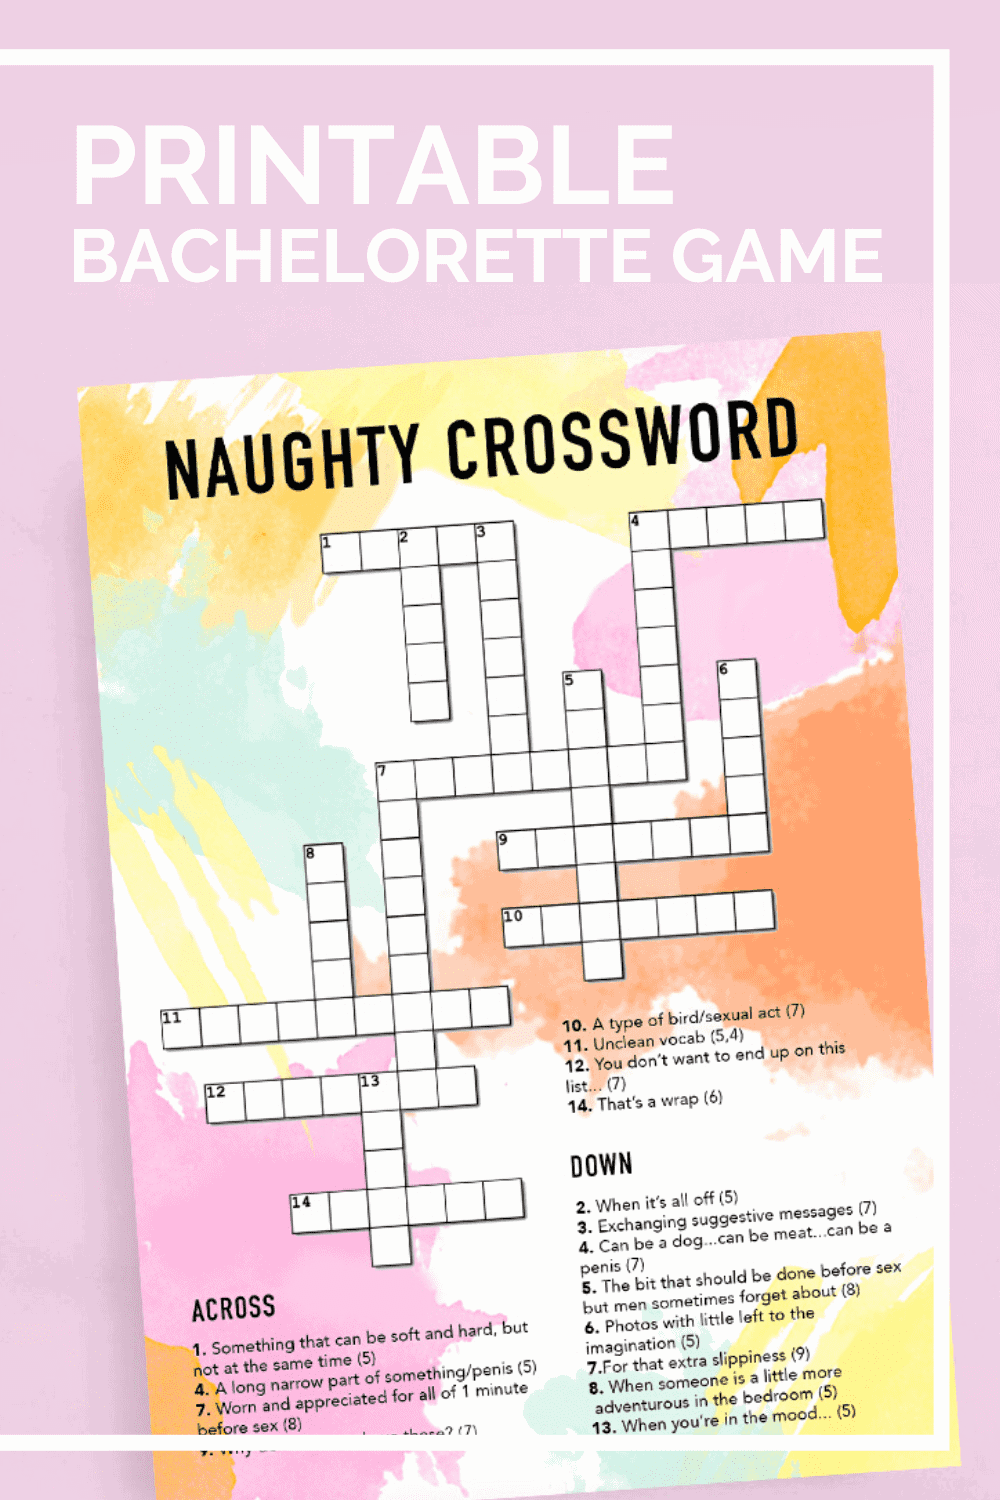 PRINT THIS NAUGHTY CROSSWORD GAME FOR A FUN BACHELORETTE PARTY ACTIVITY Bespoke Bride